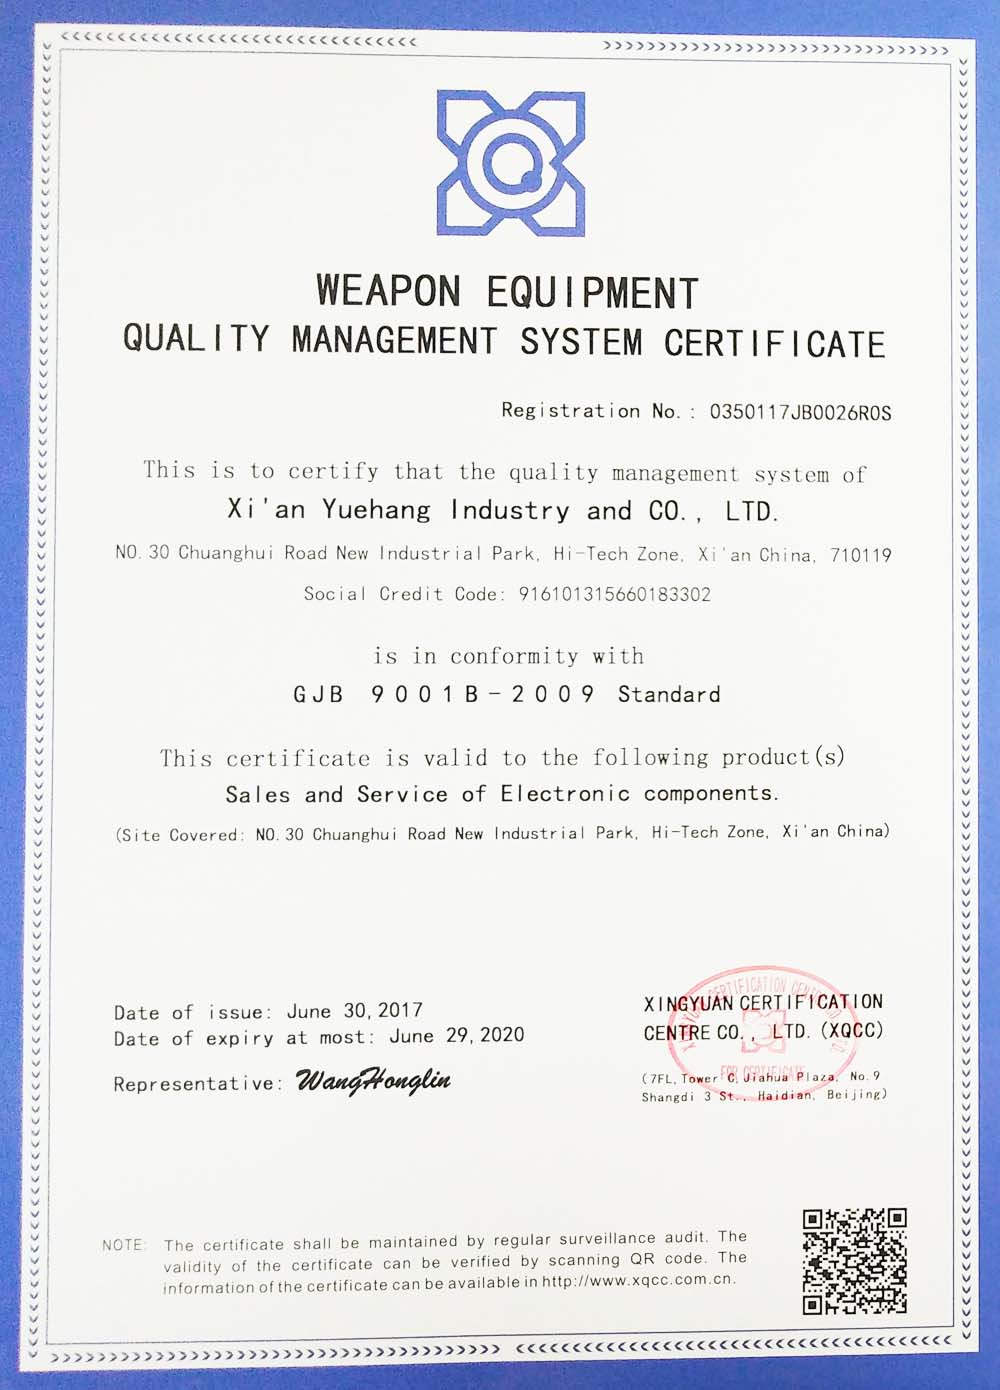 relay quality certification 1.jpg